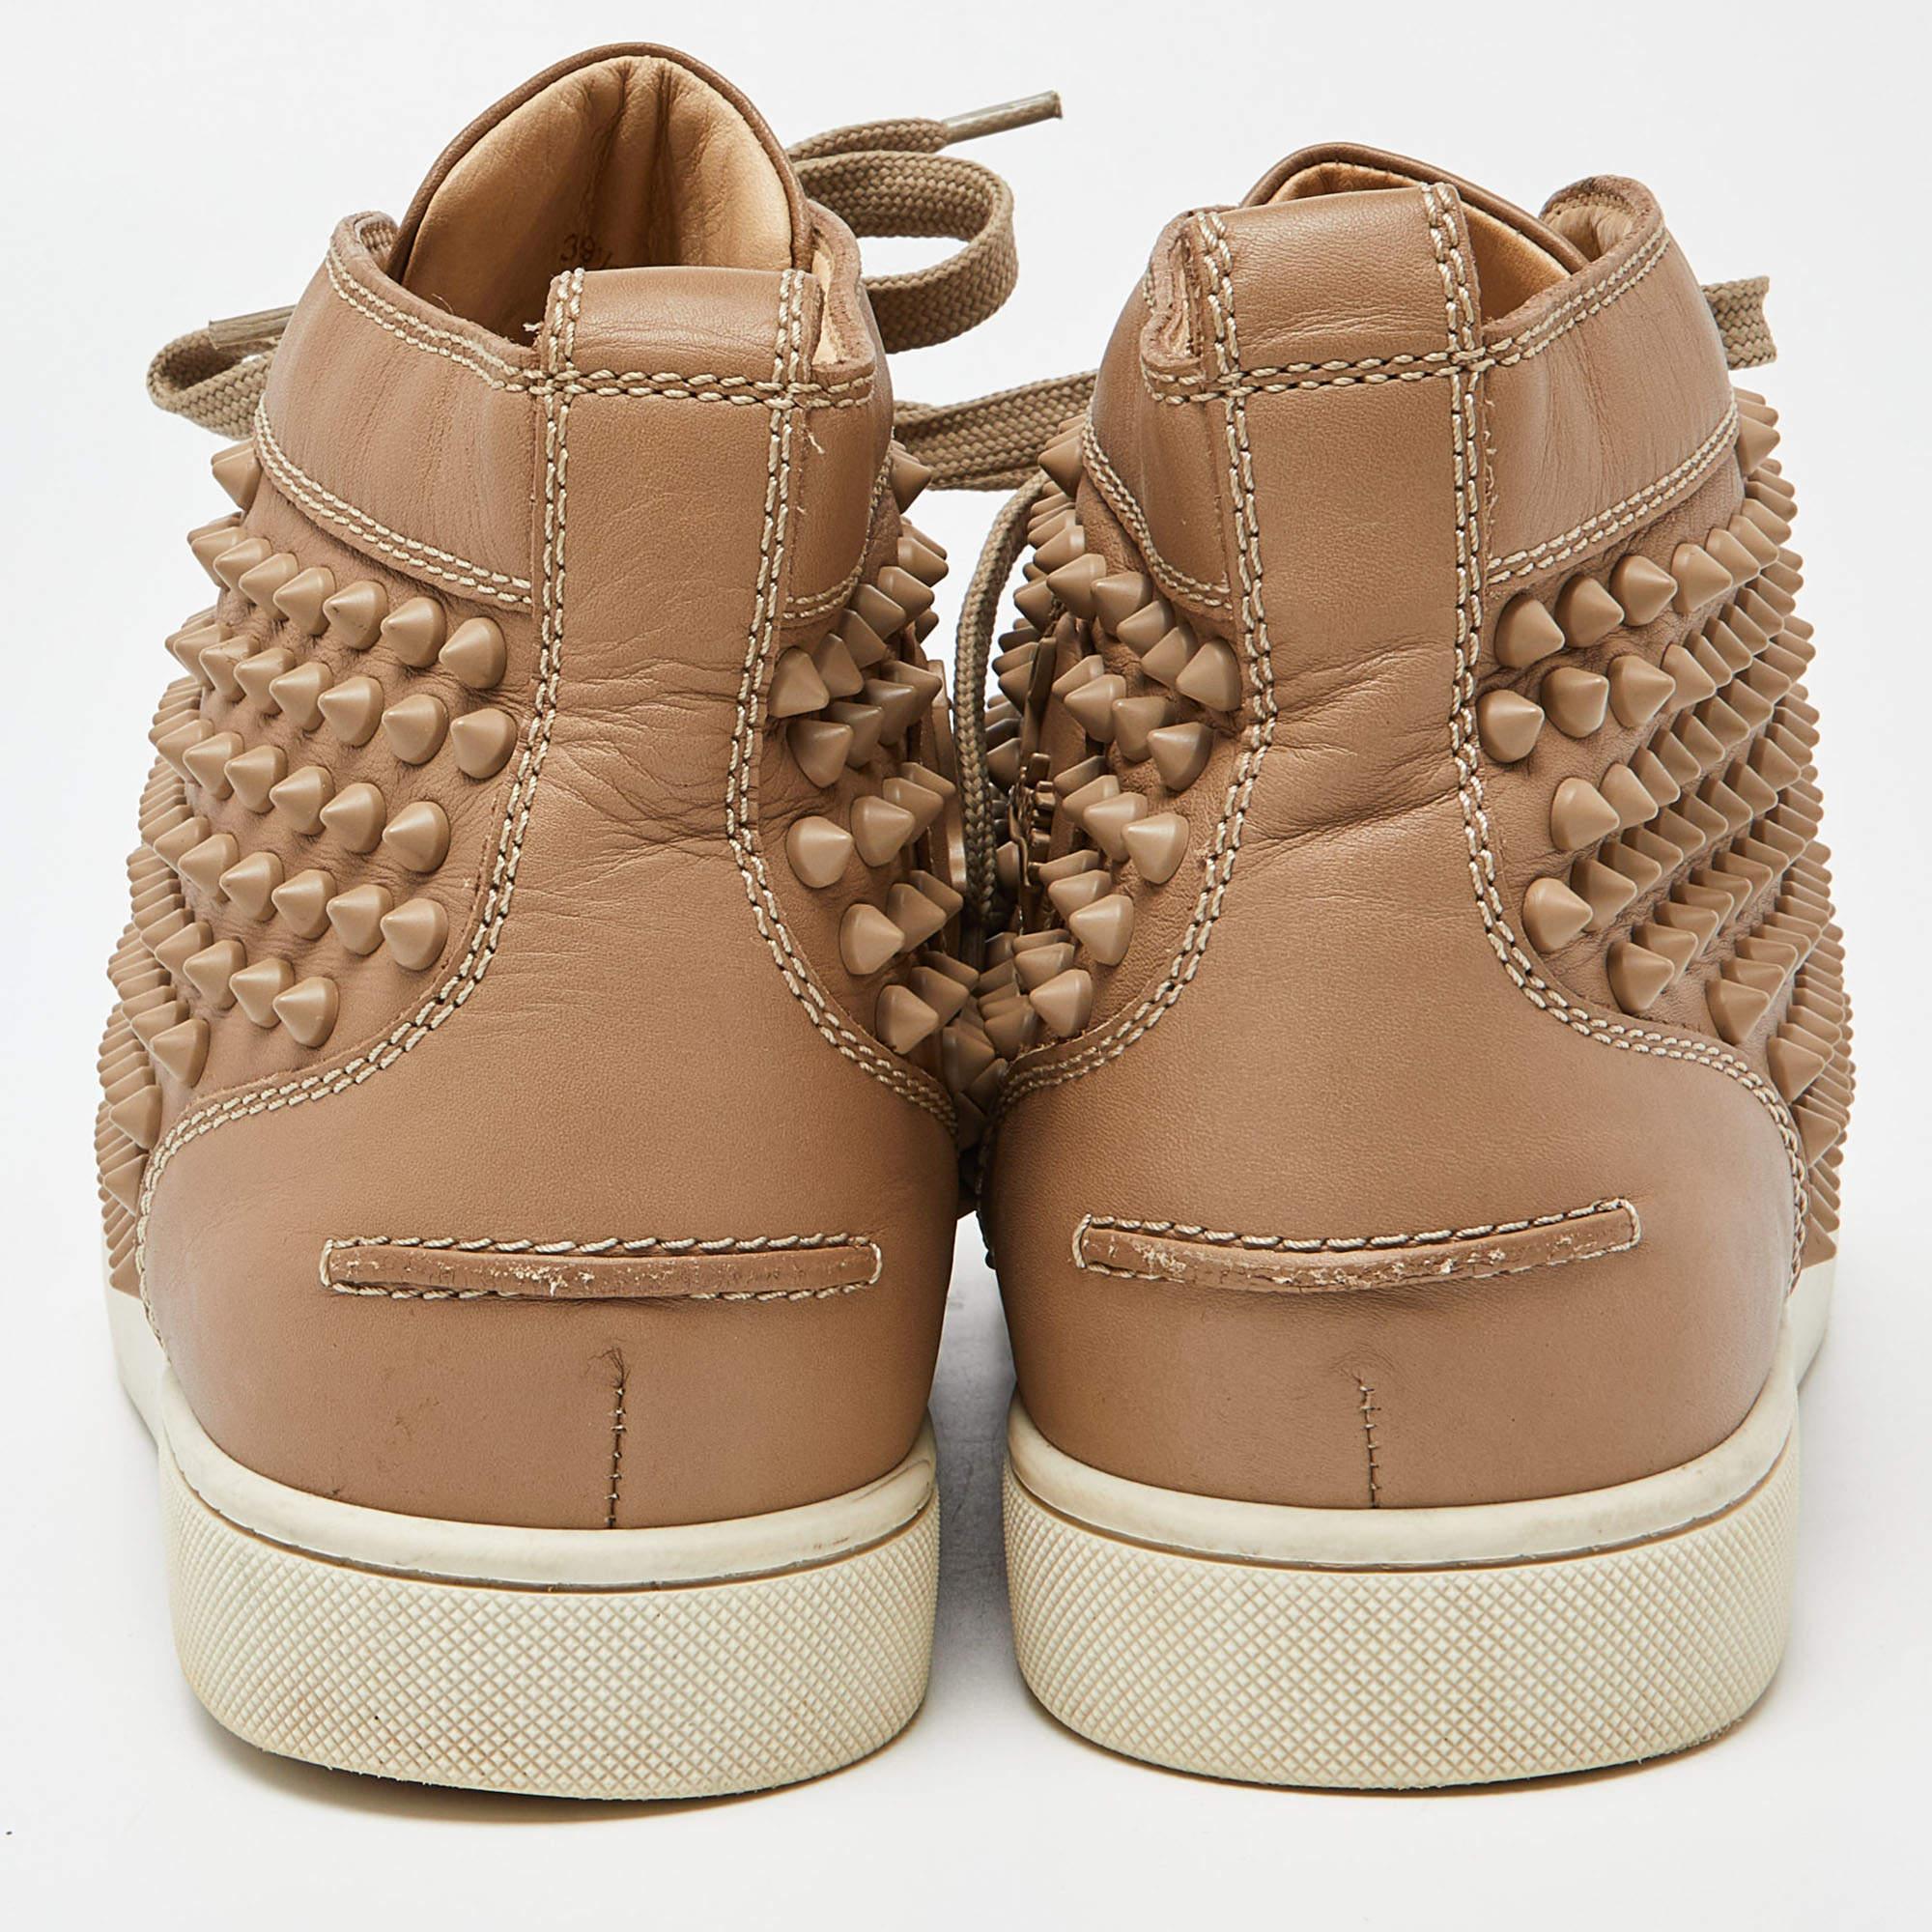 Christian Louboutin Beige Leather Louis Spike High Top Sneakers Size 39.5 For Sale 2